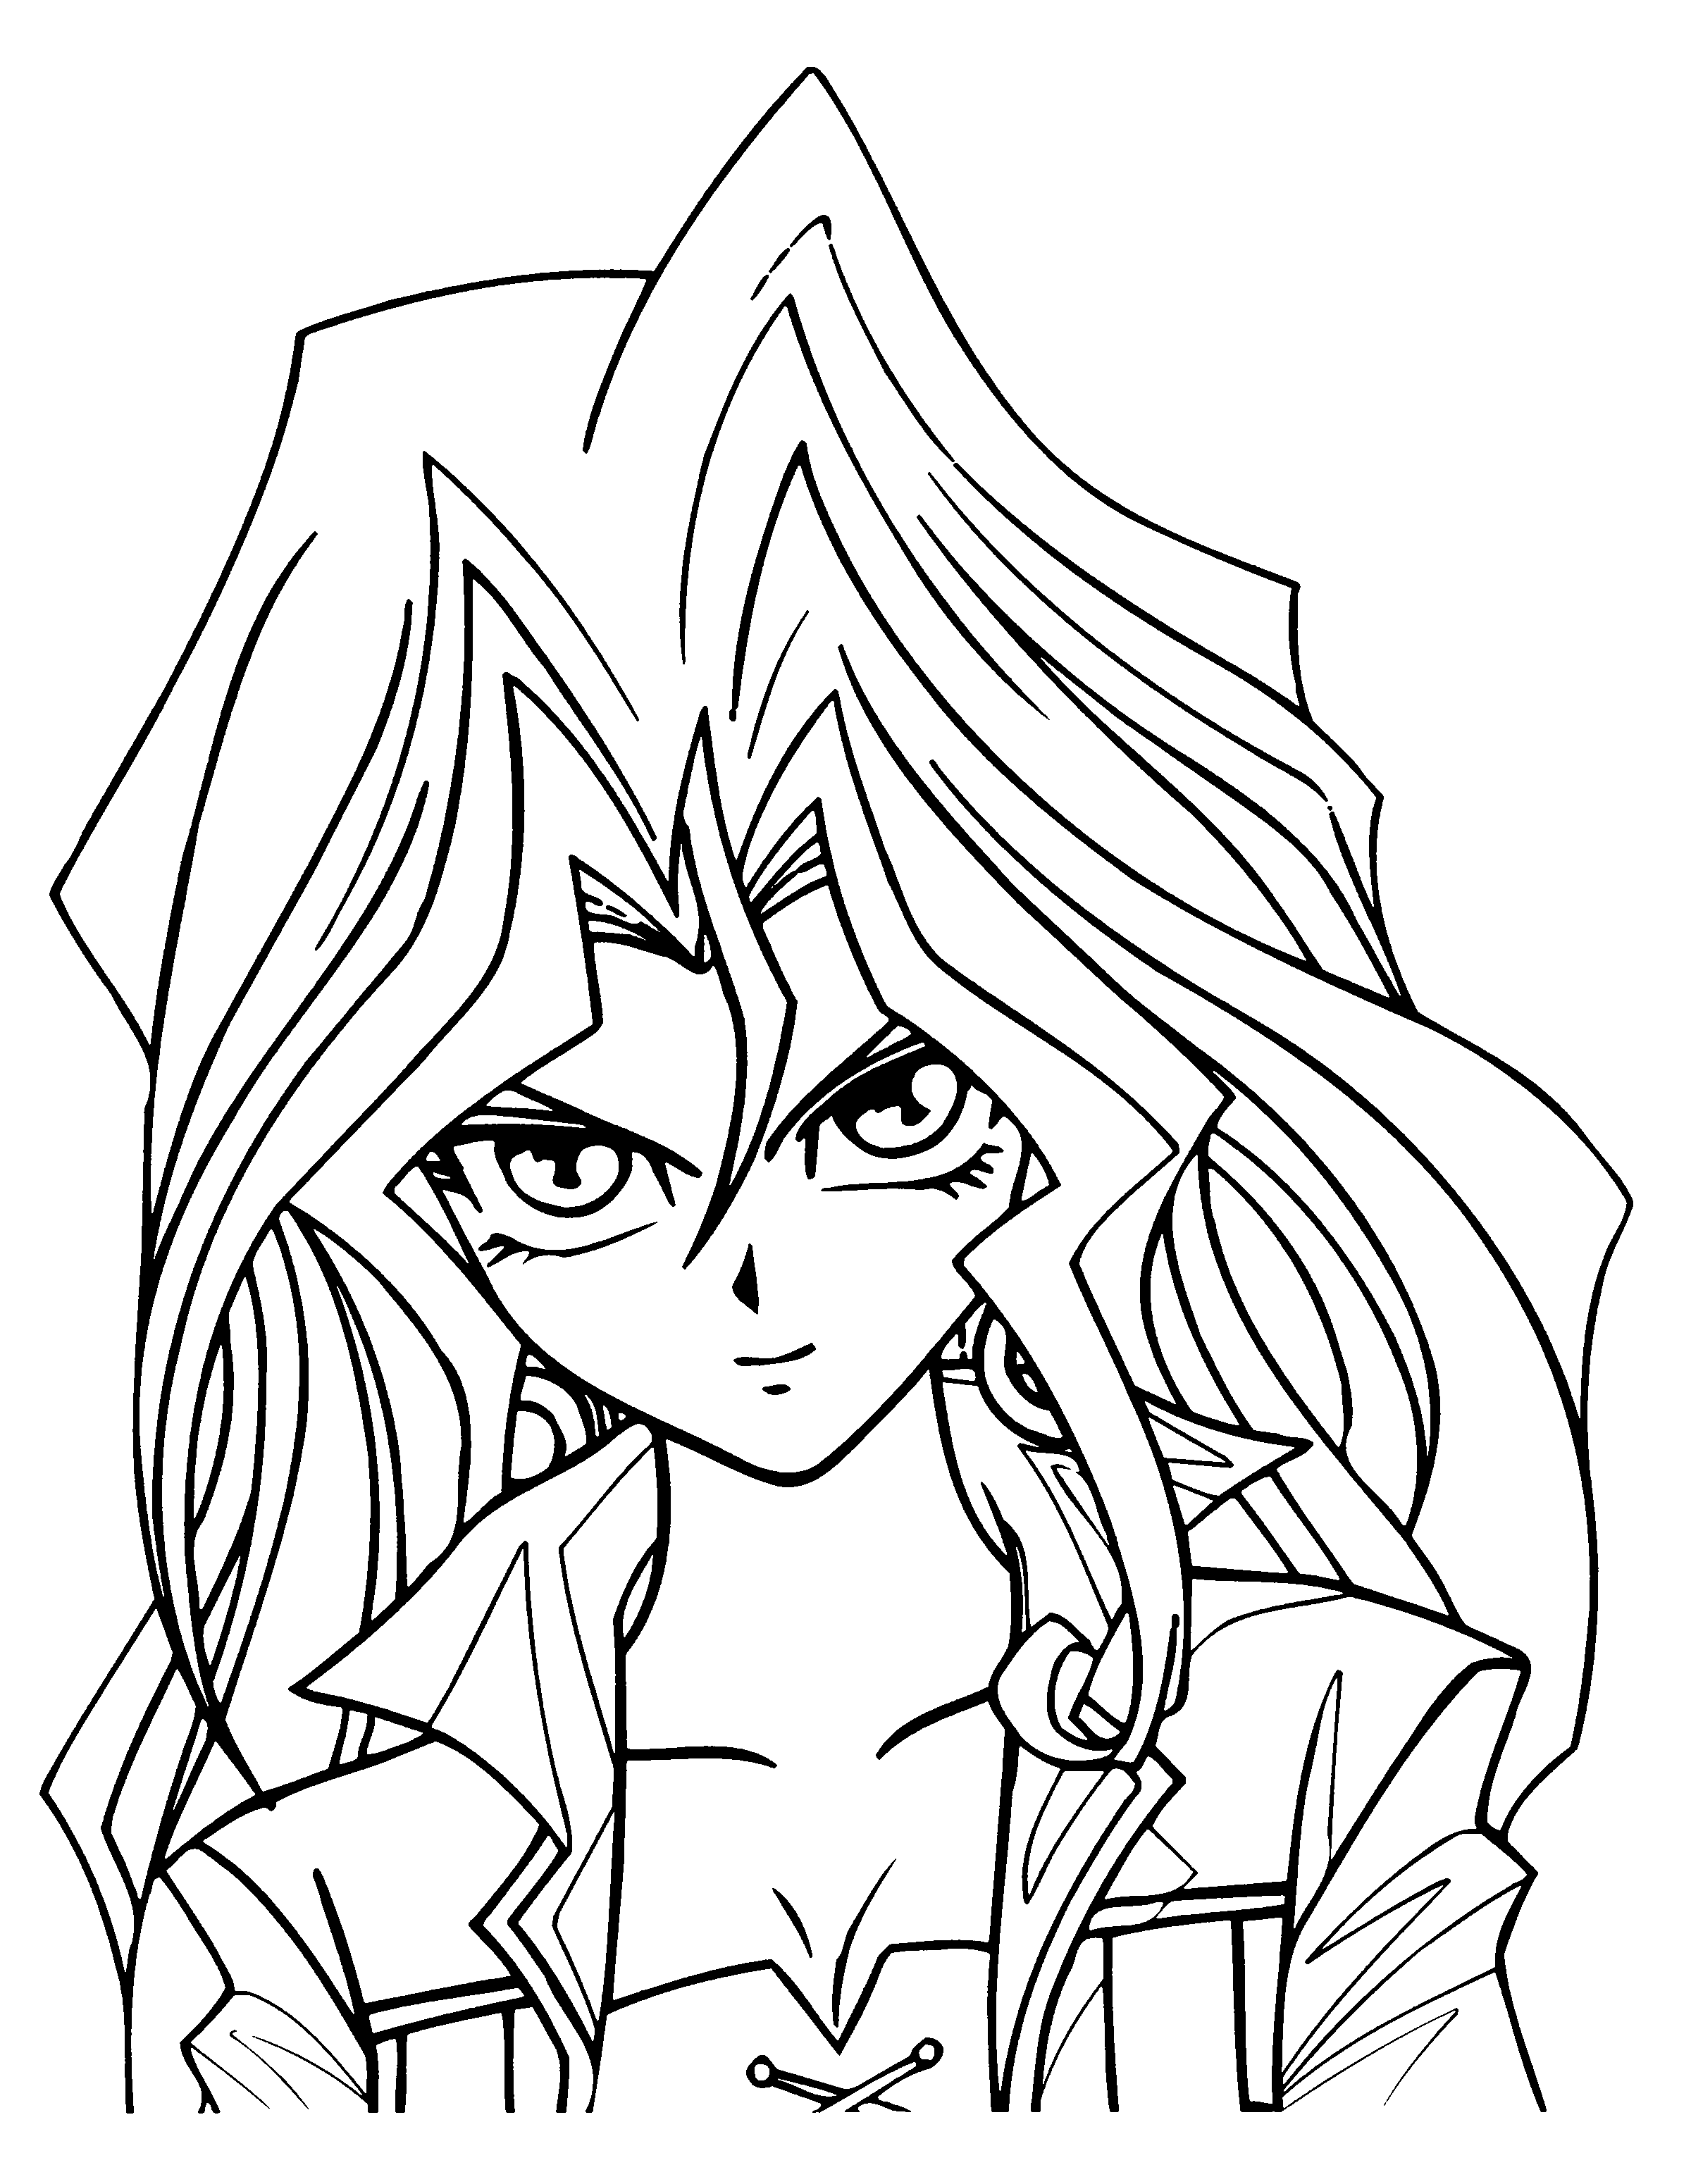 Yugioh coloring pages to download and print for free